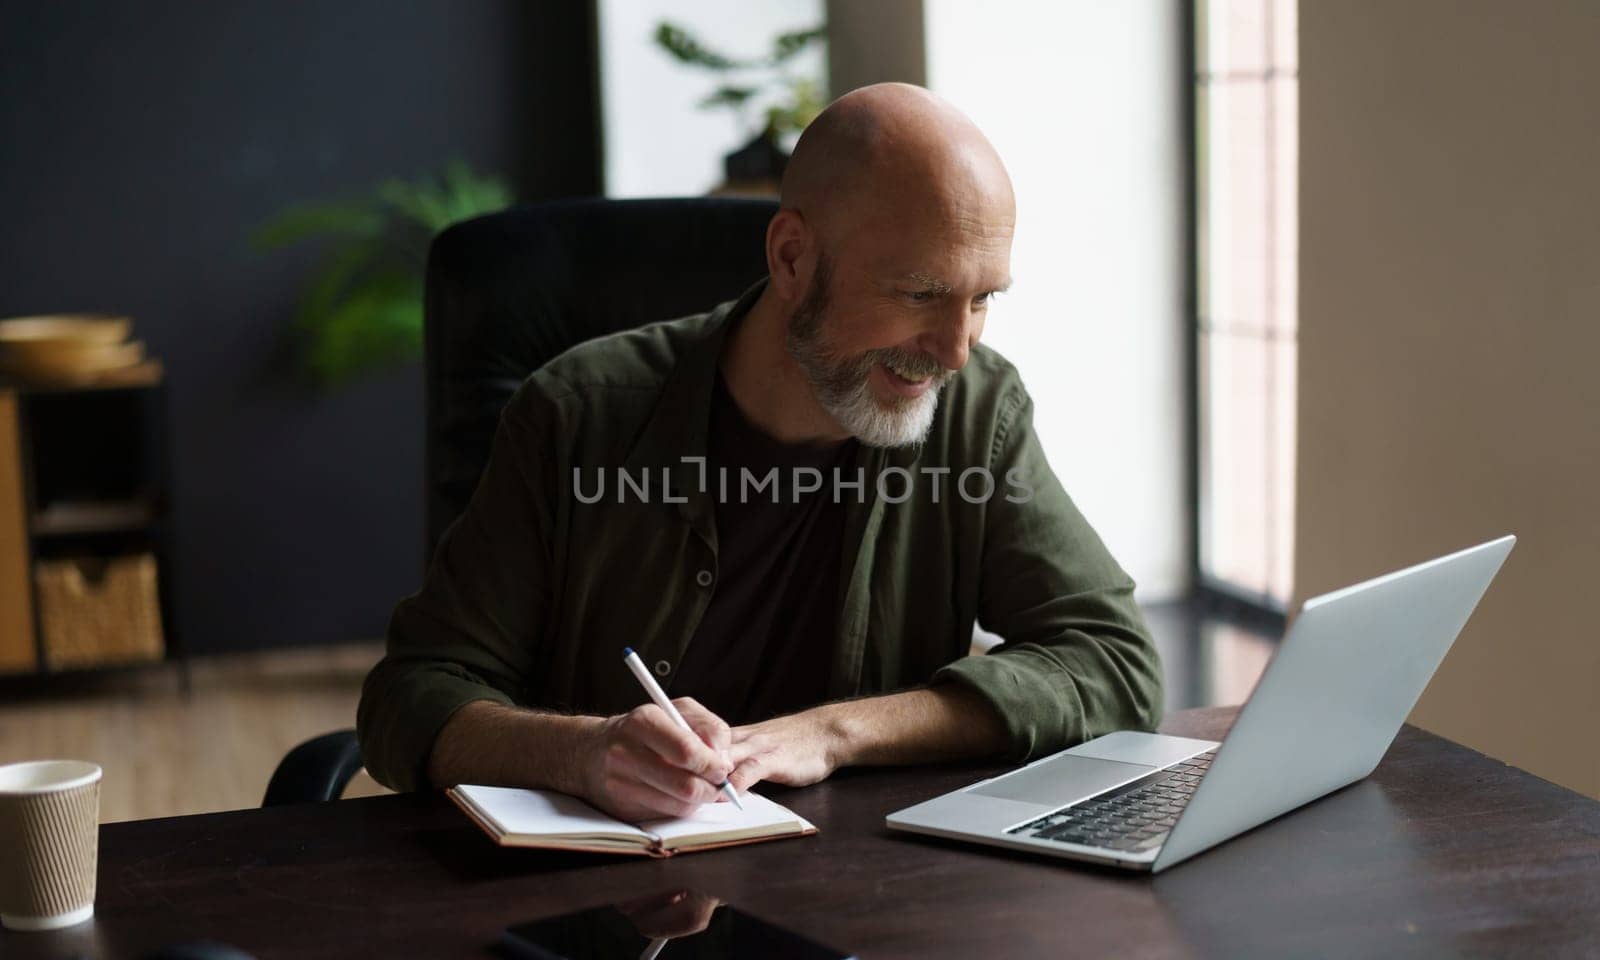 Smiling mid-aged man focused and productive state. He seated at desk indoors, engrossed work. With notepad in front, he diligently writing down notes, while simultaneously looking at computer screen. . High quality photo